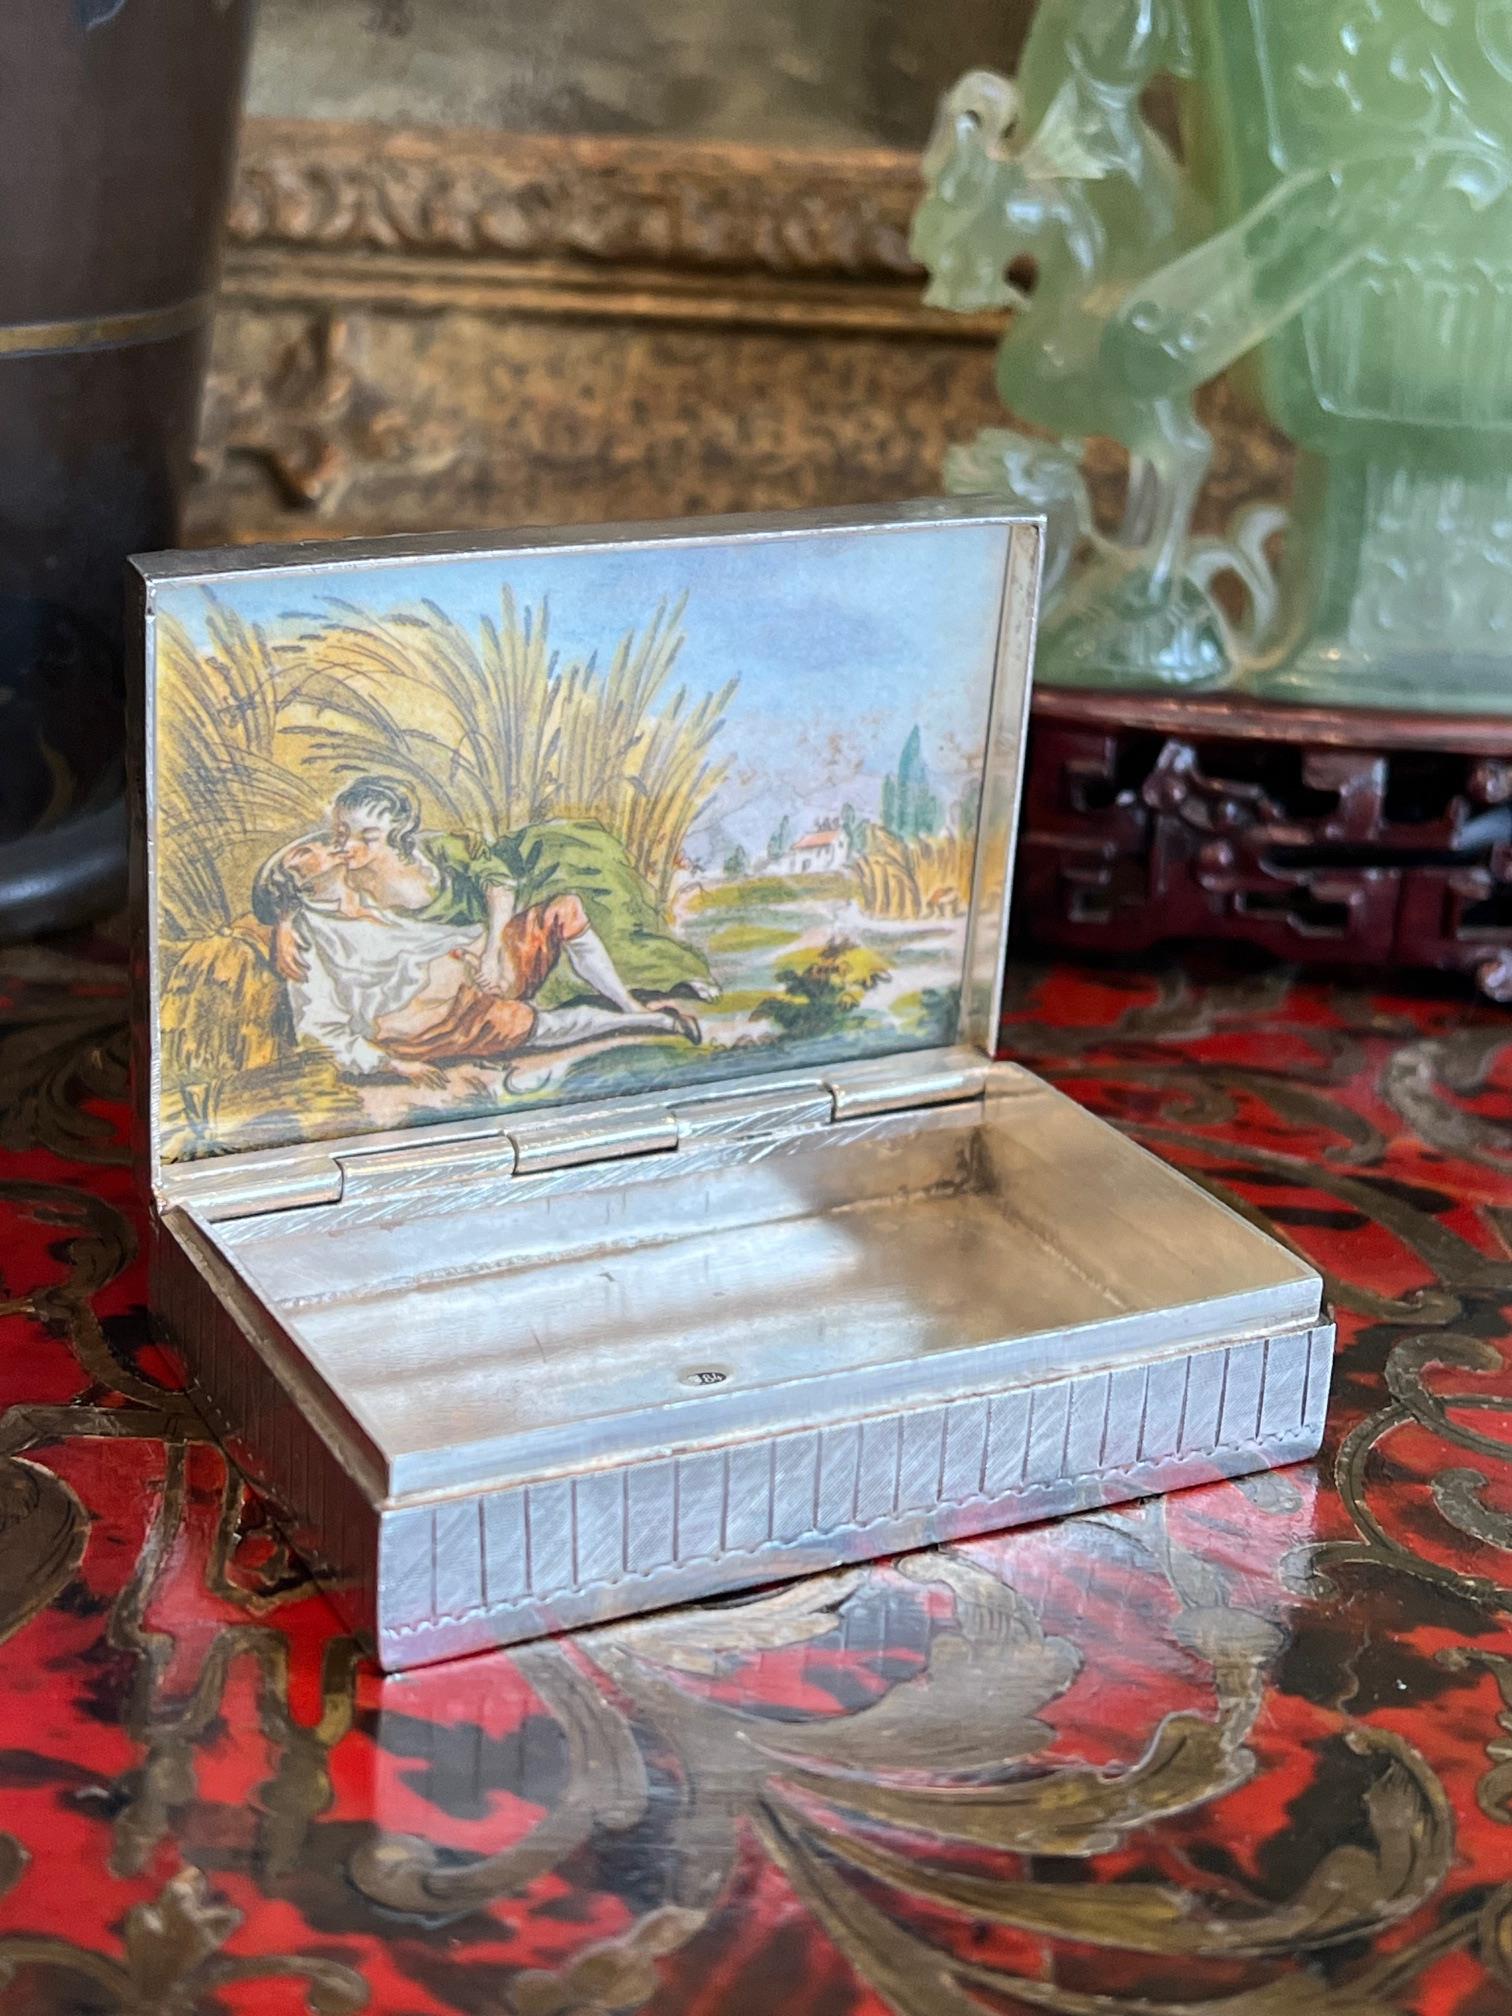 A RUSSIAN SILVER SNUFF BOX INLAID WITH A MARIA THERESA COIN - Image 3 of 6